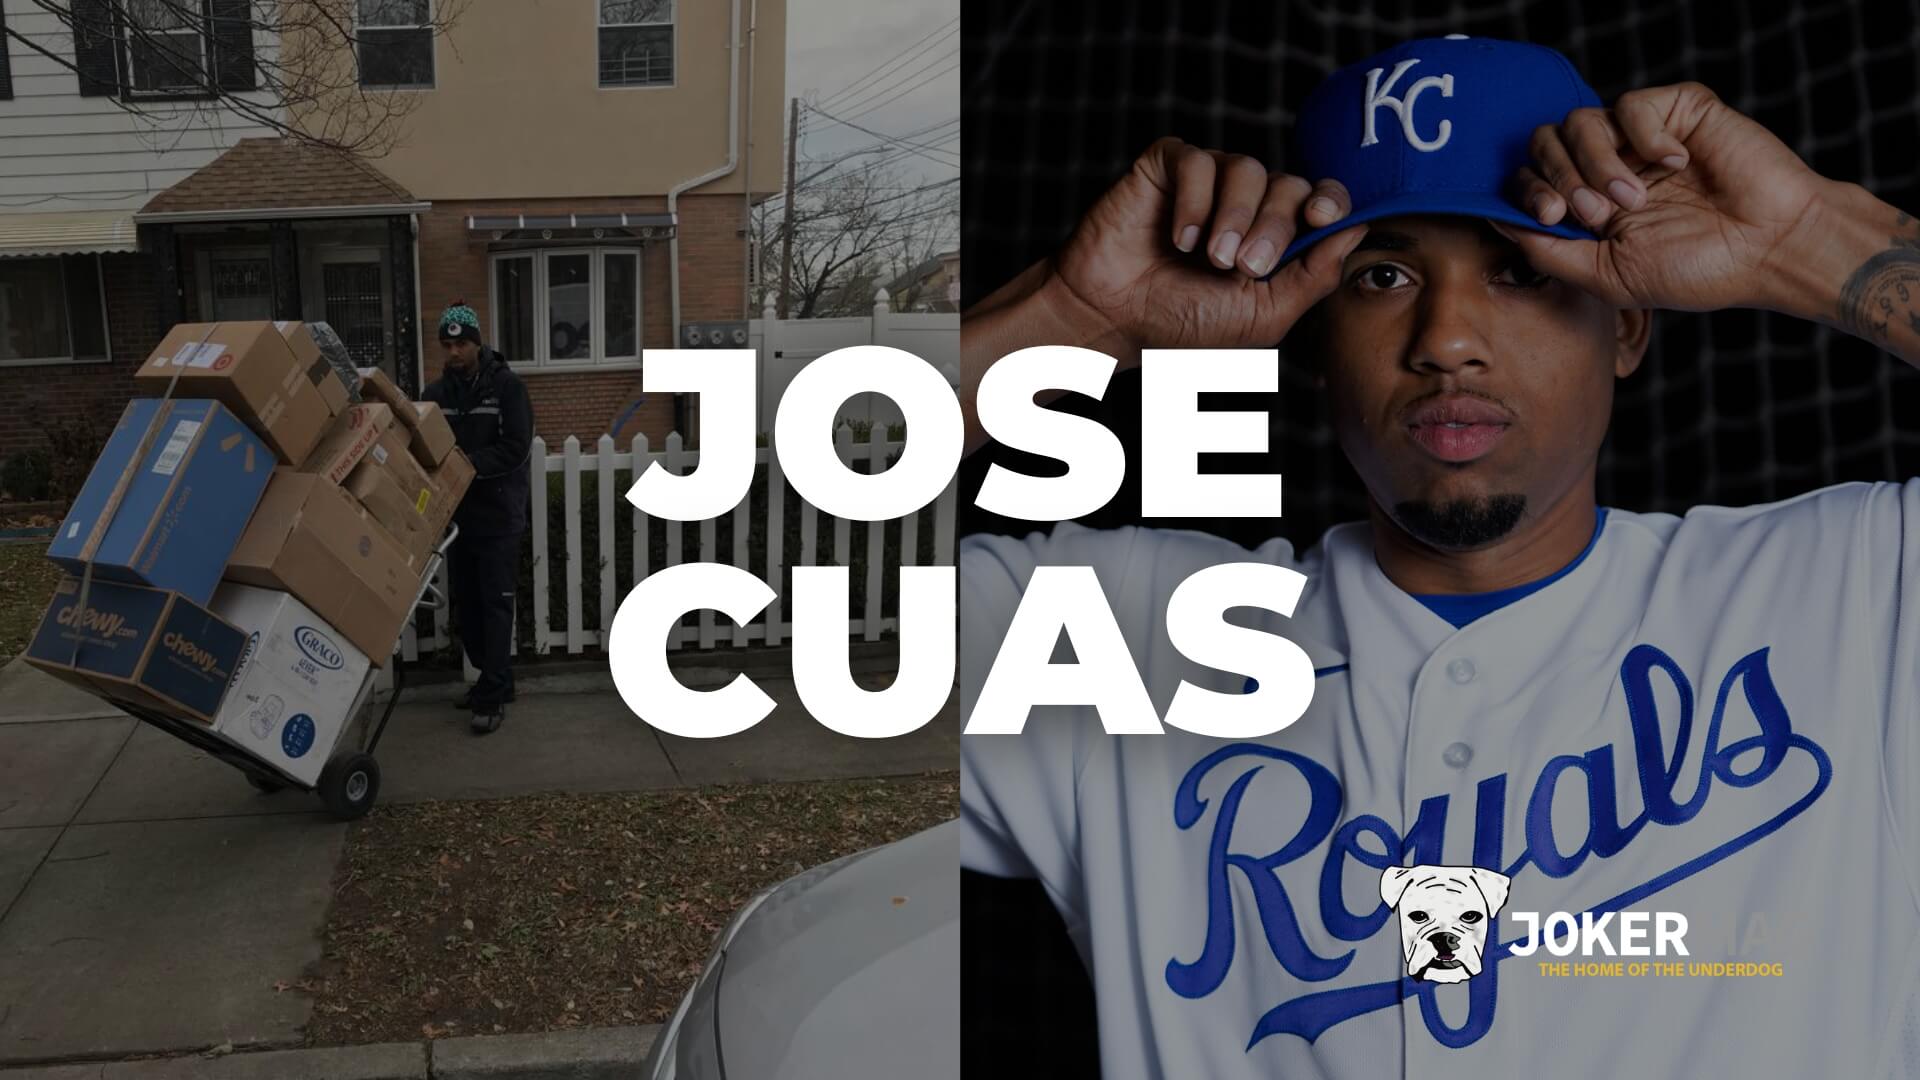 Jose Cuas went from FedEx delivery driver to MLB pitcher for the Kansas City Royals